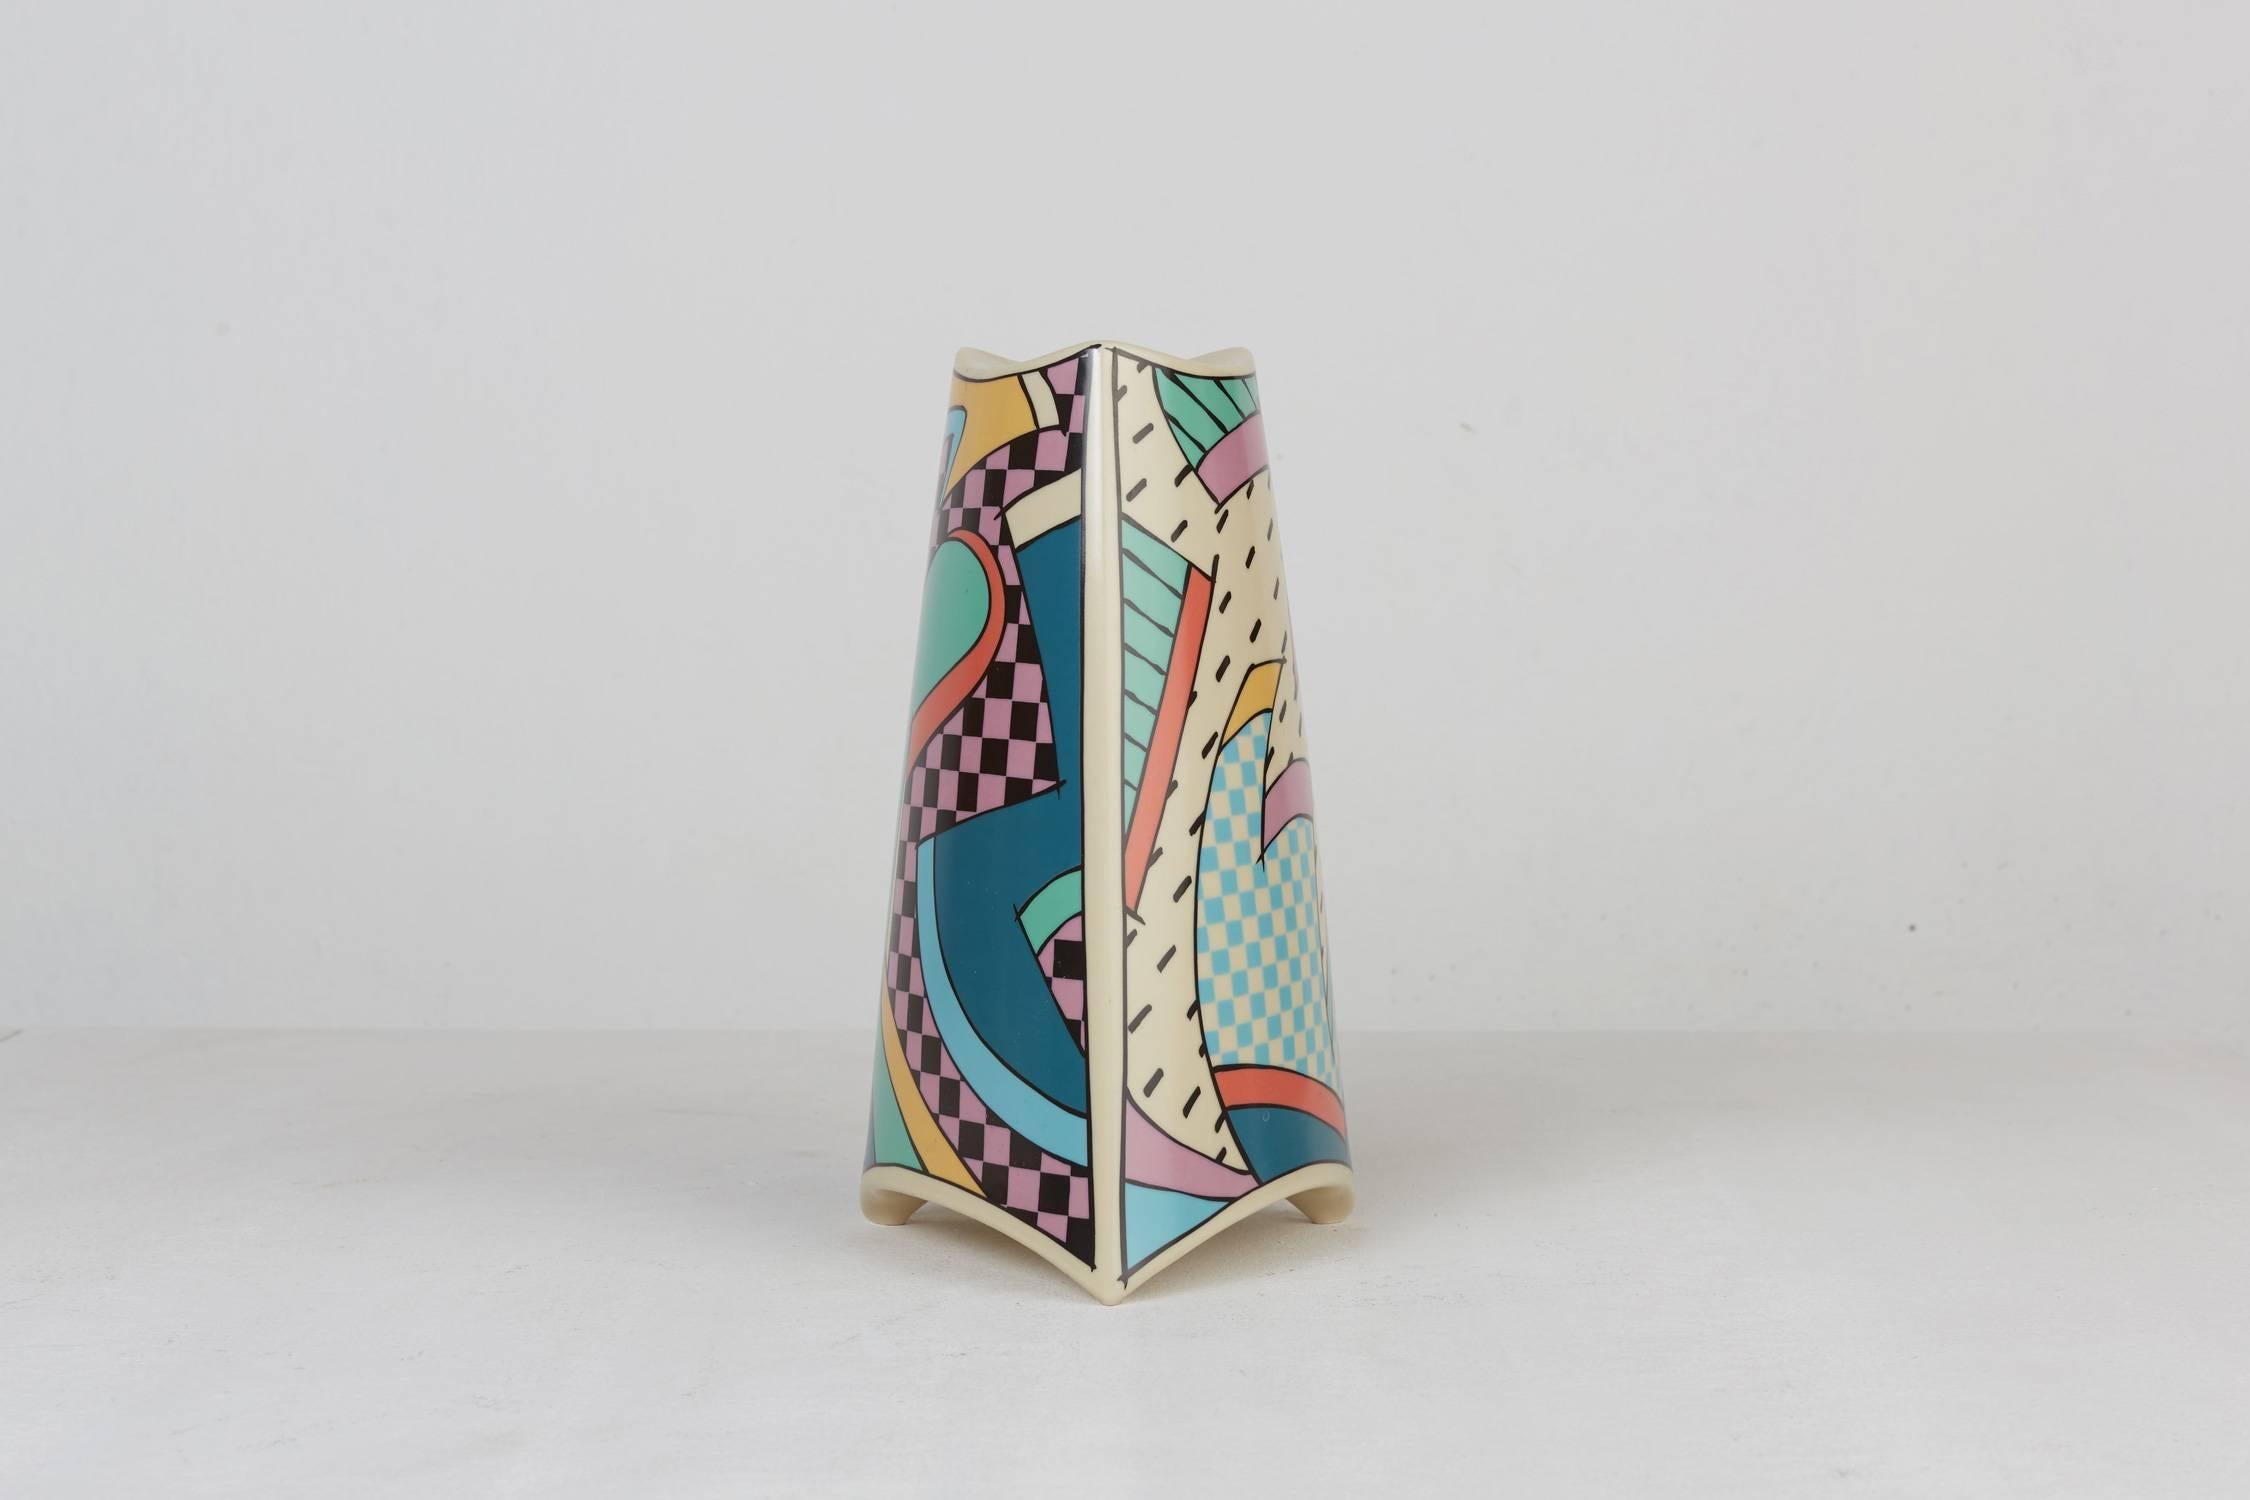 Vase 'Flash' with 'Flash One' pattern.
Design by Dorothy Hafner (1985).
Manufactured by Rosenthal, Germany.
Measures: H 24 cm.
Porcelain, multicolored.
Out of production.